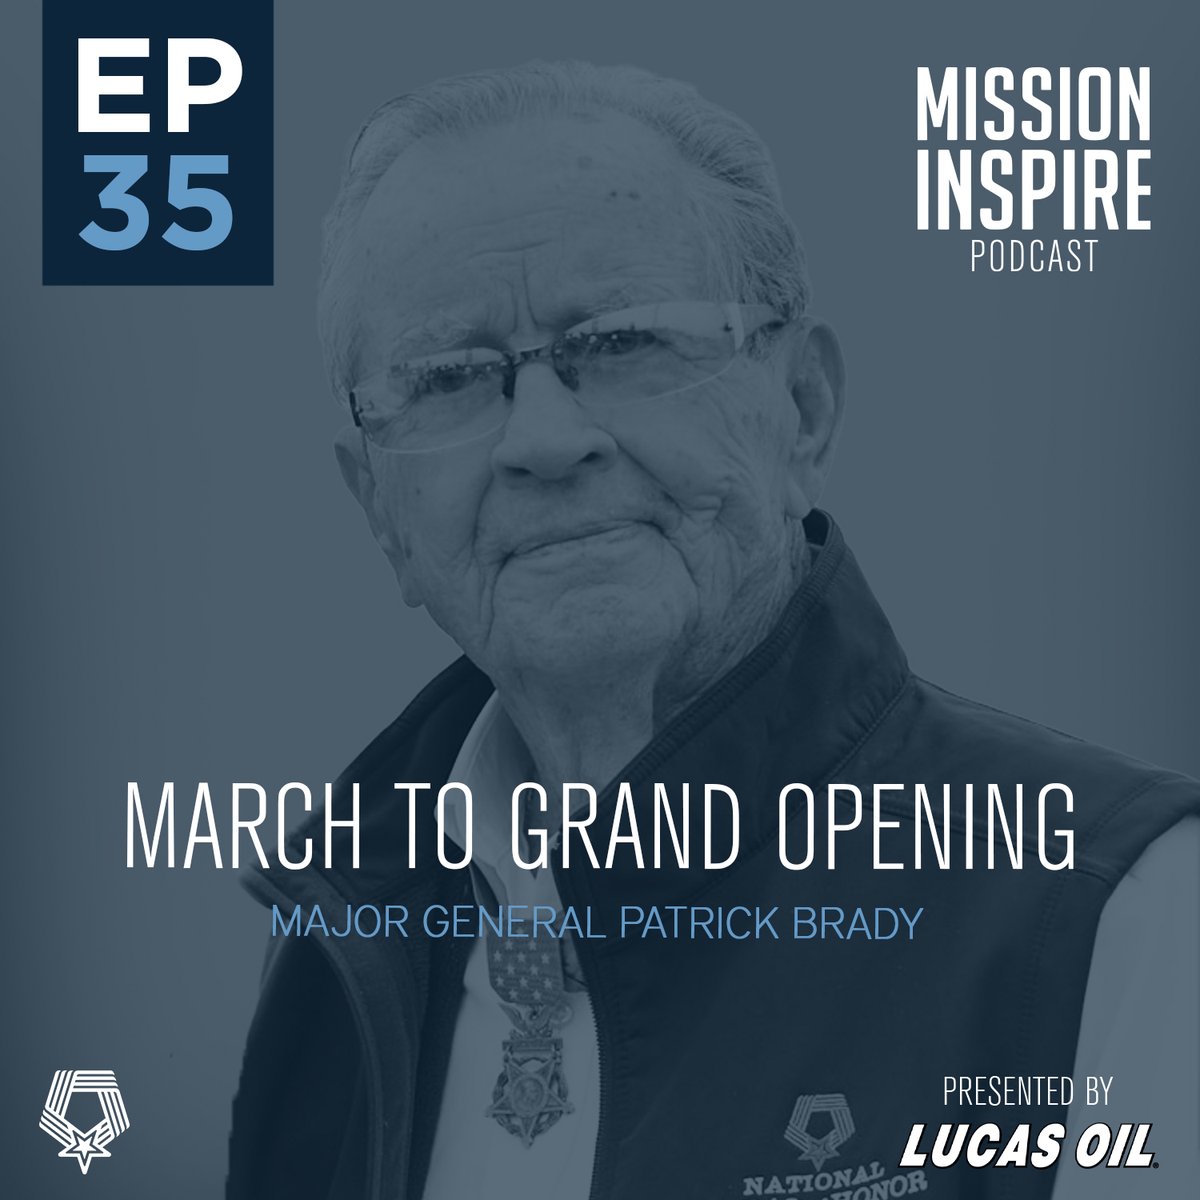 ICYMI: #MedalofHonor recipient Maj. Gen. Pat Brady joined the #MissionInspire podcast presented by @Lucas_Oil to share how important the Museum is for highlighting Medal of Honor recipients’ stories and values. Listen to the new episode here: missioninspire.podbean.com/e/march-to-gra…